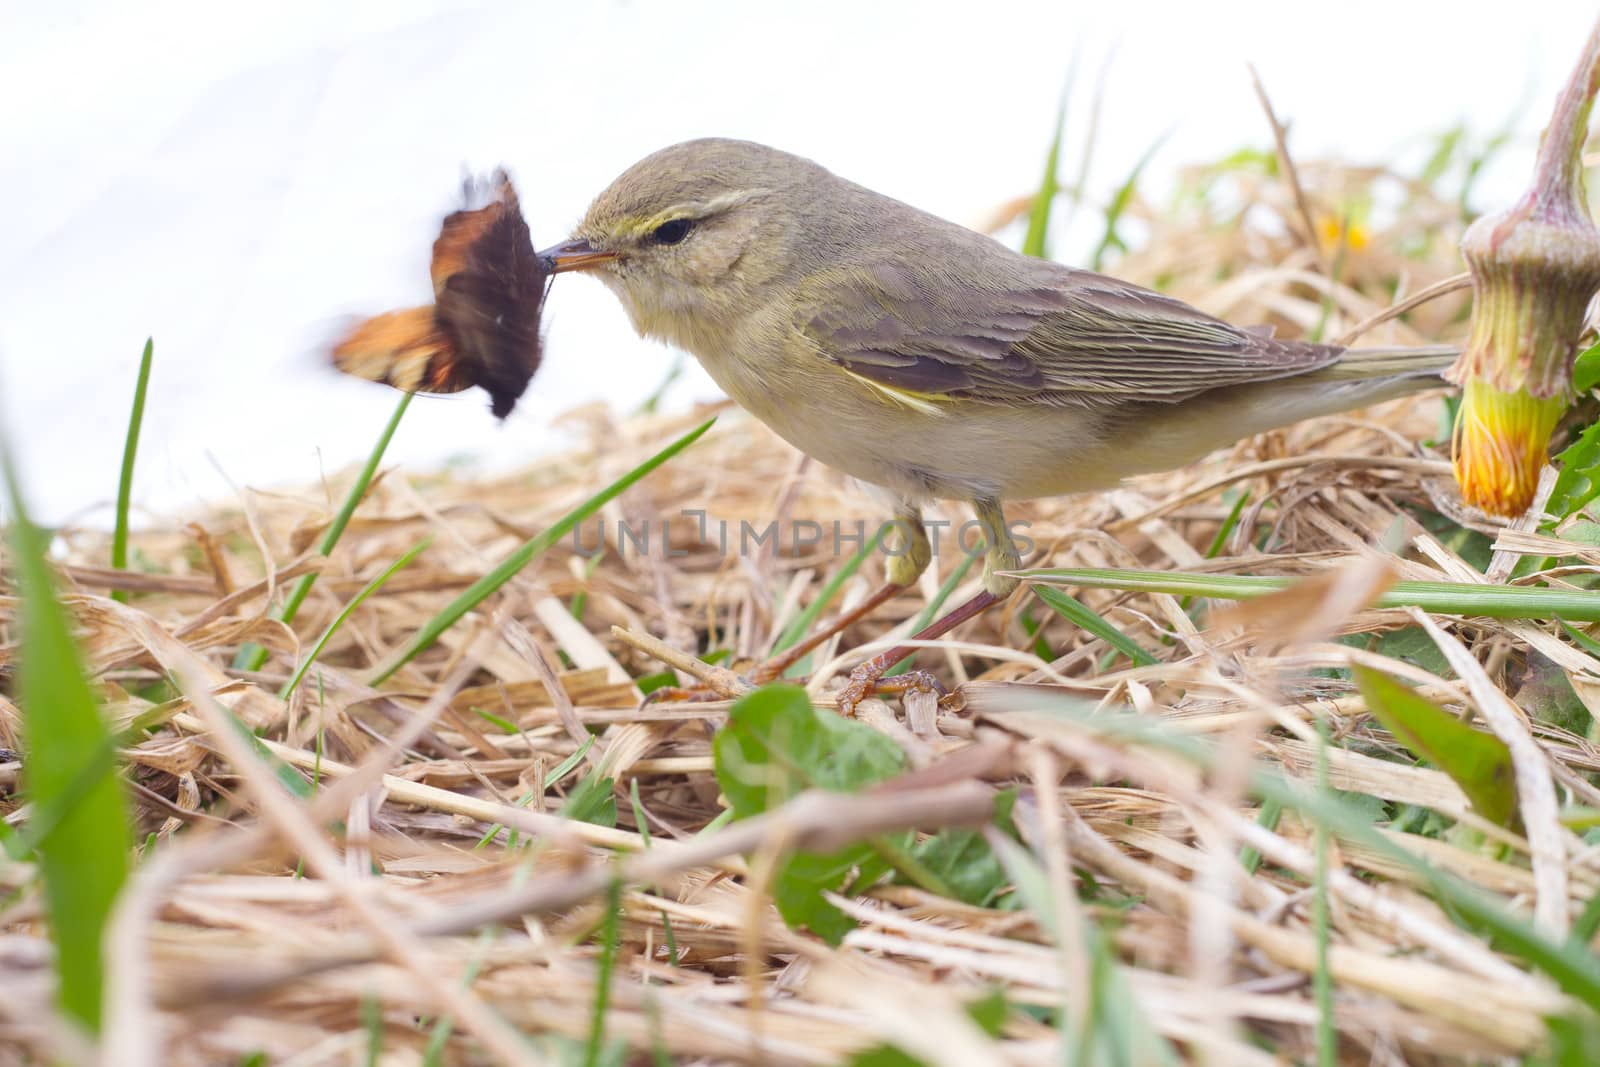 willow warbler eats the caught butterfly